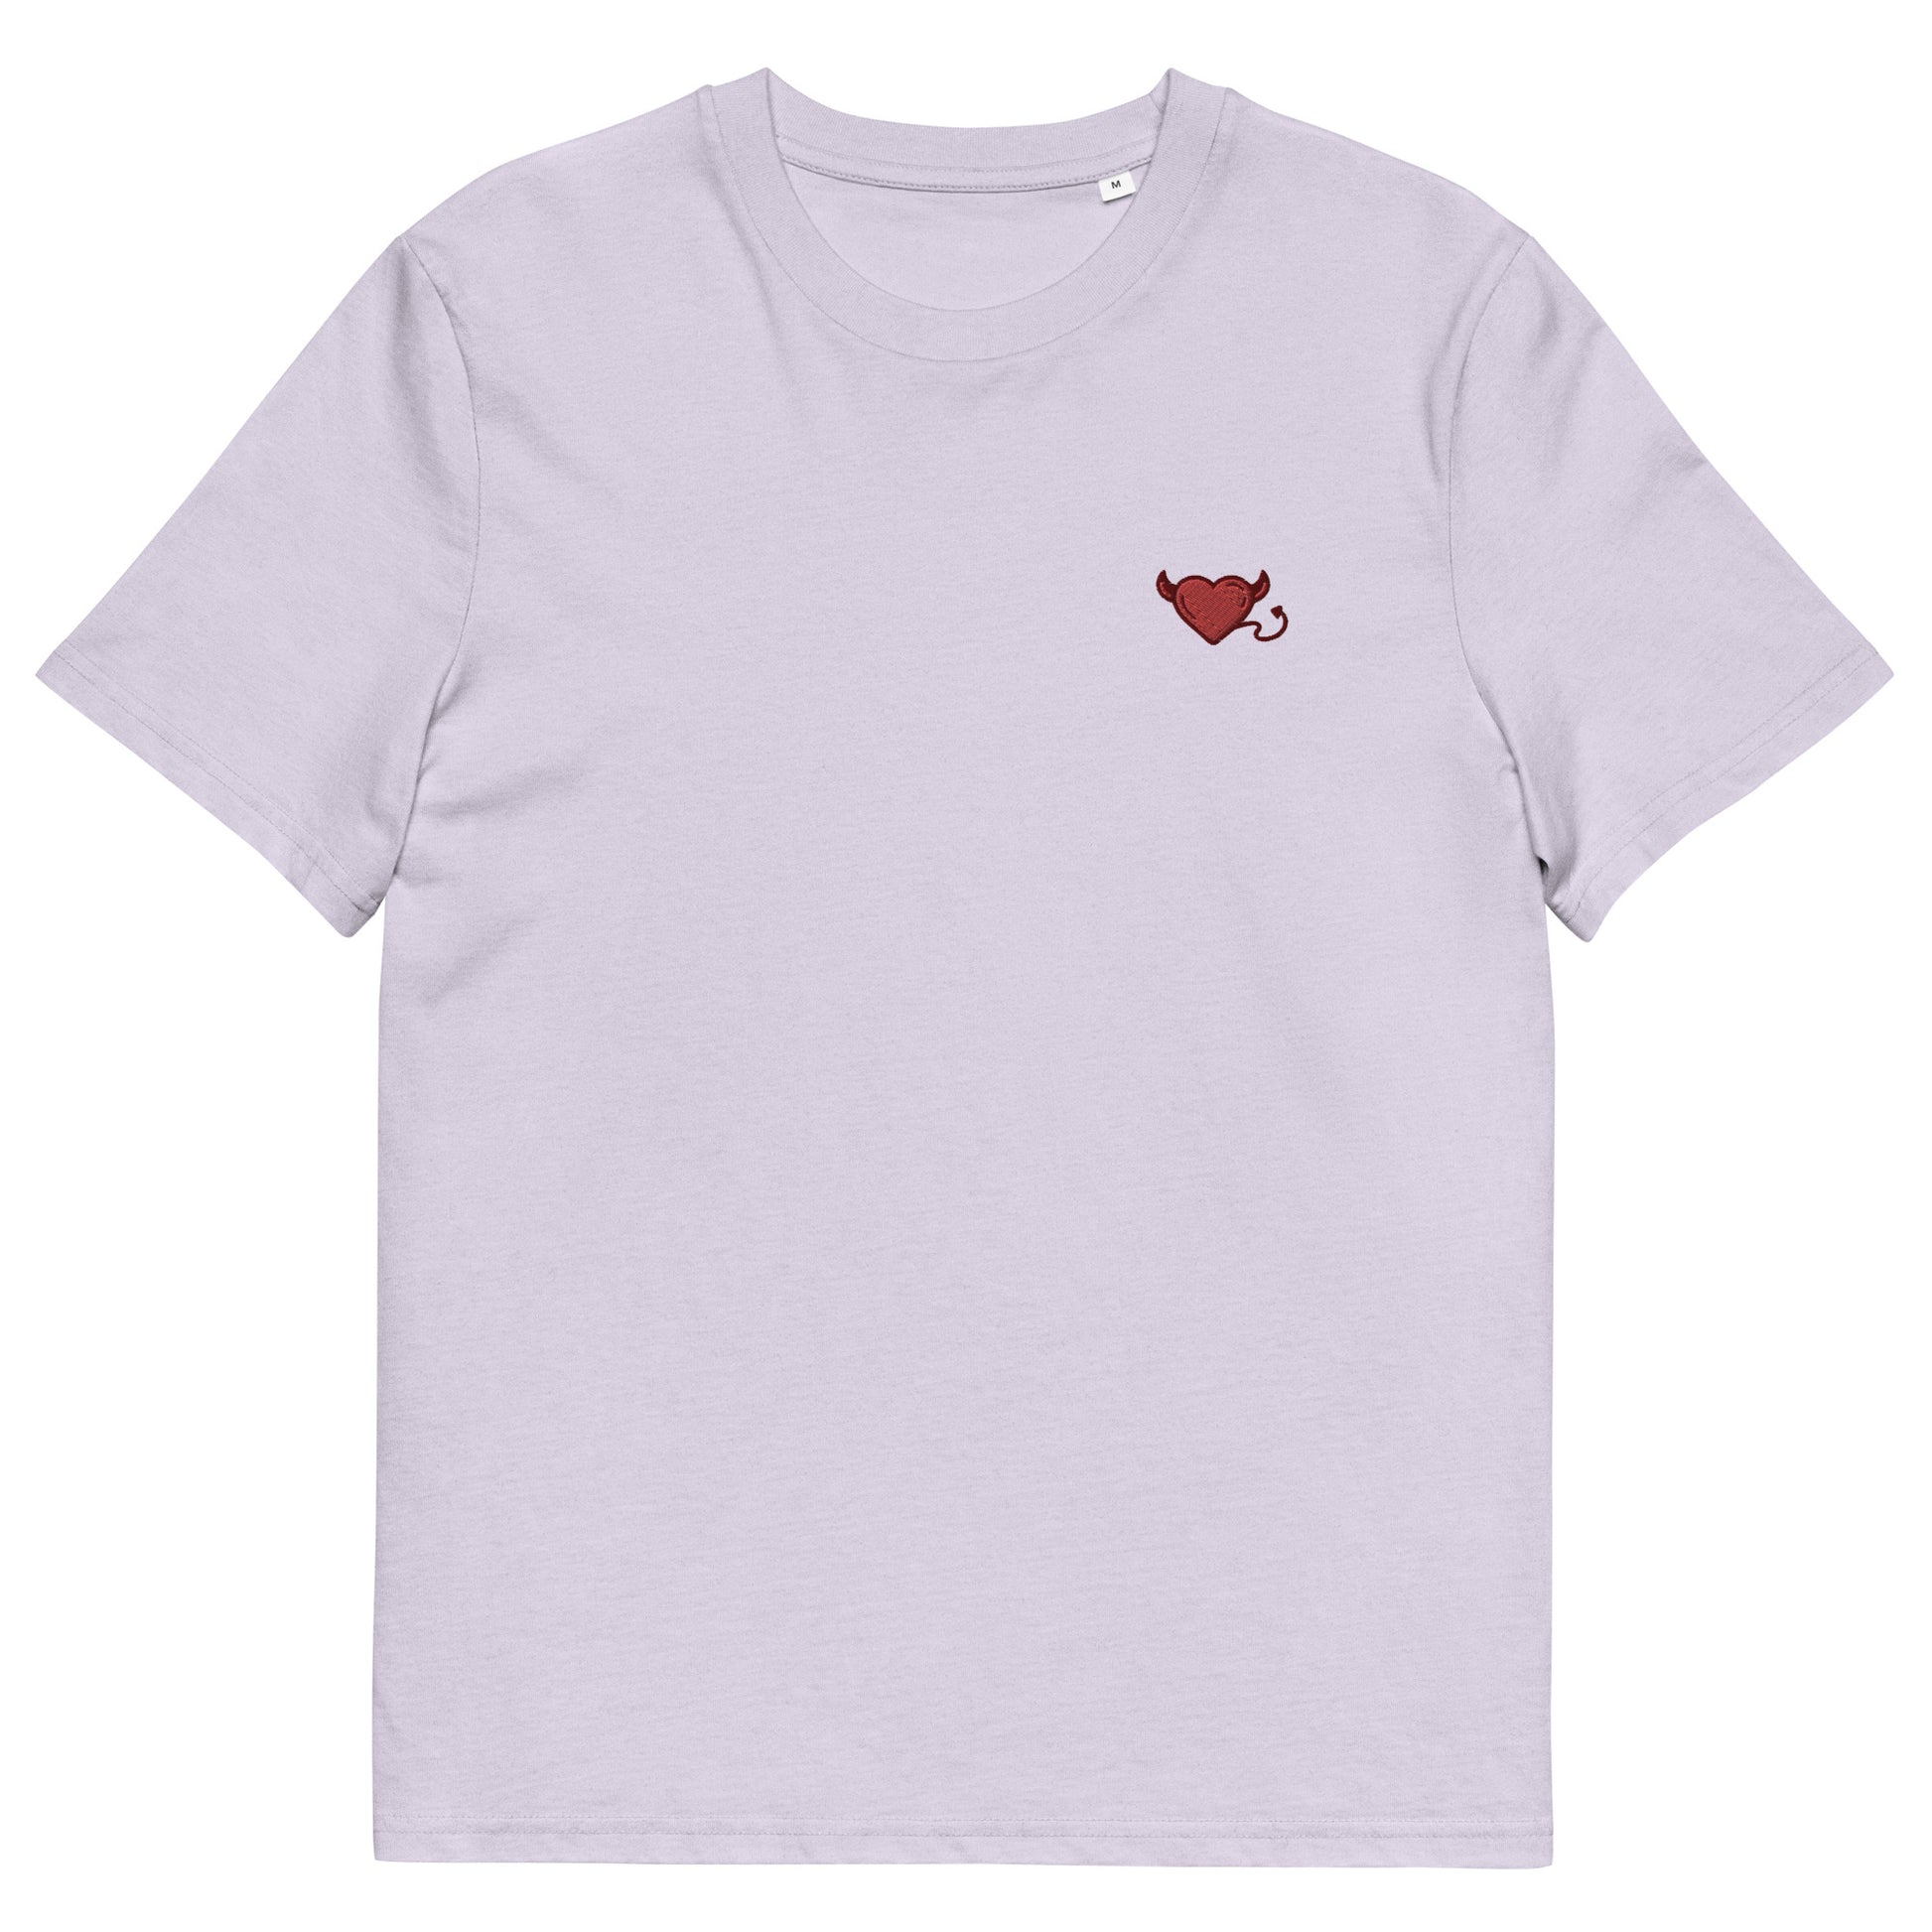 Fitted lavender t-shirt with a red devil's heart embroidered on the left chest. 